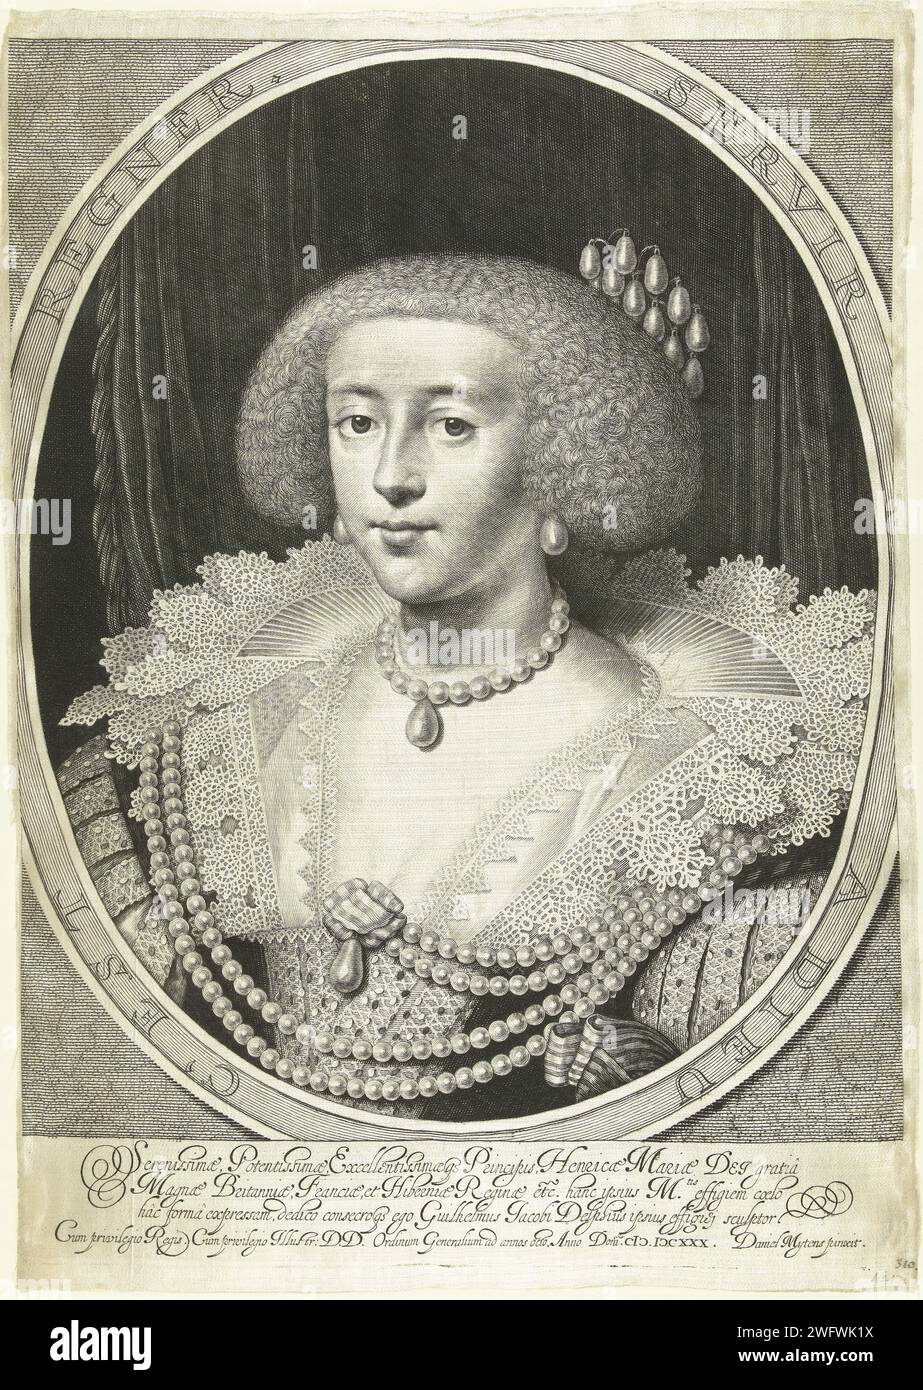 Portrait of Henrietta Maria van Bourbon, Queen of England, Willem Jacobsz Delff, After Daniël Mijtens (I), 1630 print Portrait of Henrietta Maria van Bourbon, queen of England, breastpiece in oval with lace collar and pearls. Motto on oval accompaniment, Latin inscription in STUDMARGE. Delft silk engraving ruler, sovereign - BB - female ruler Stock Photo